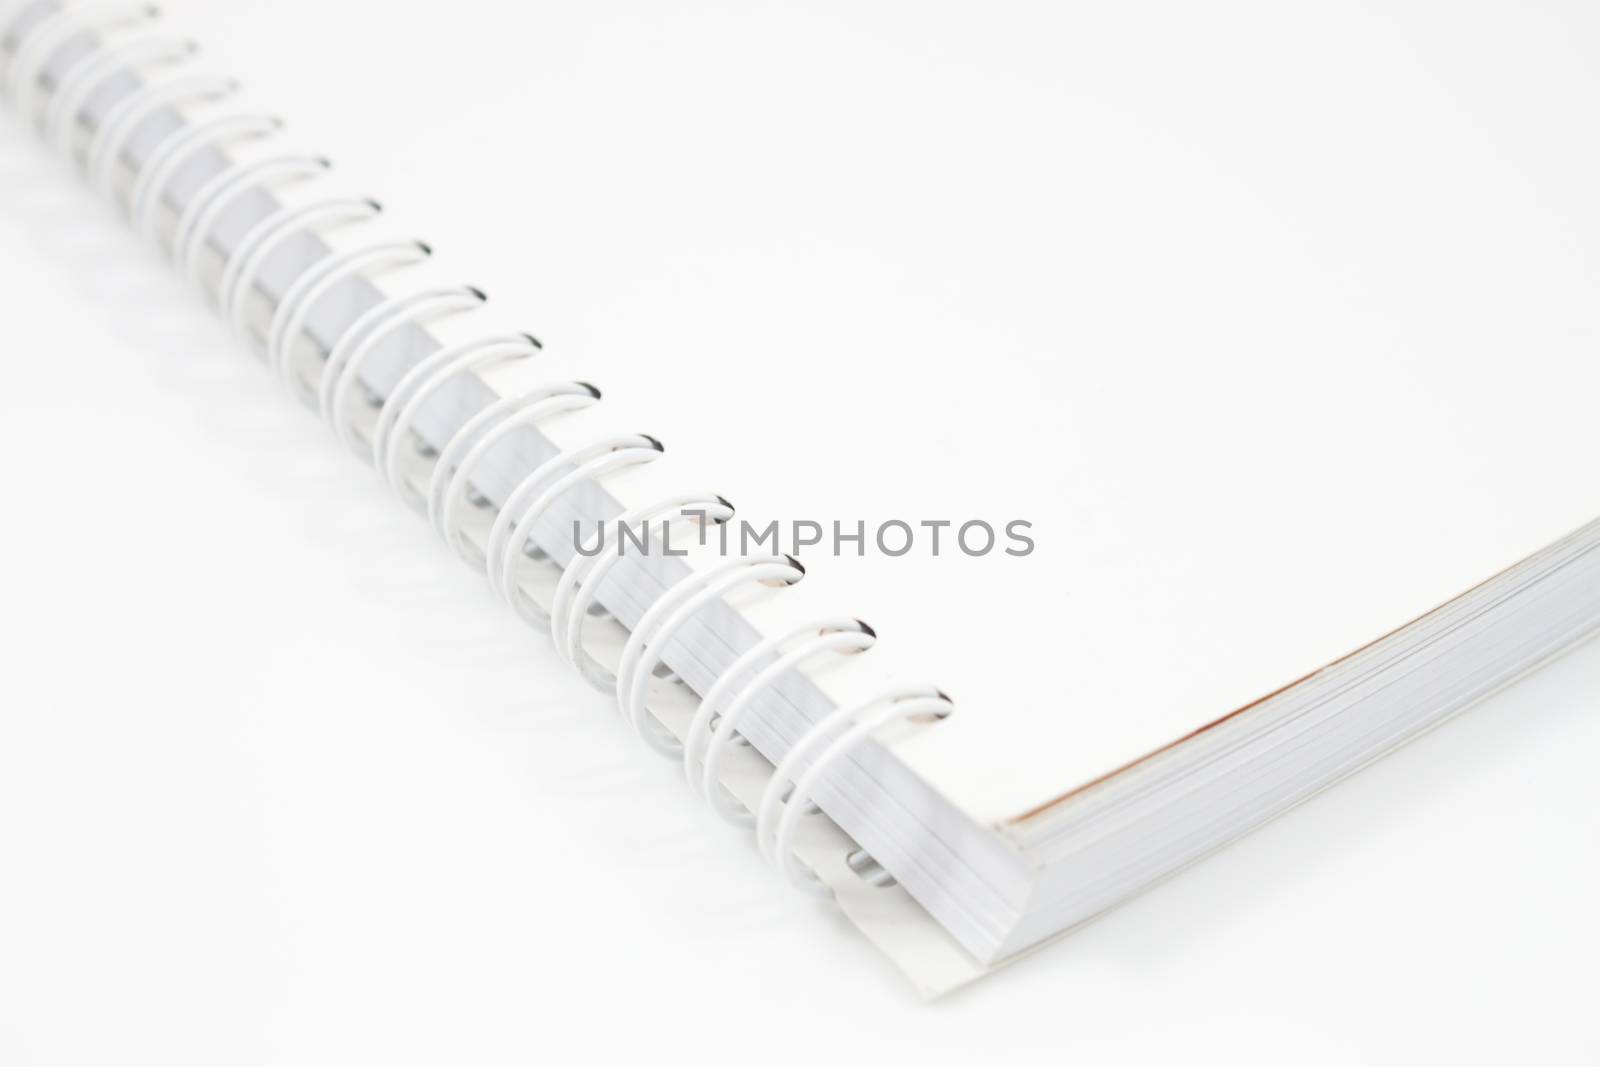 Spiral notebook isolated on white background, stock photo